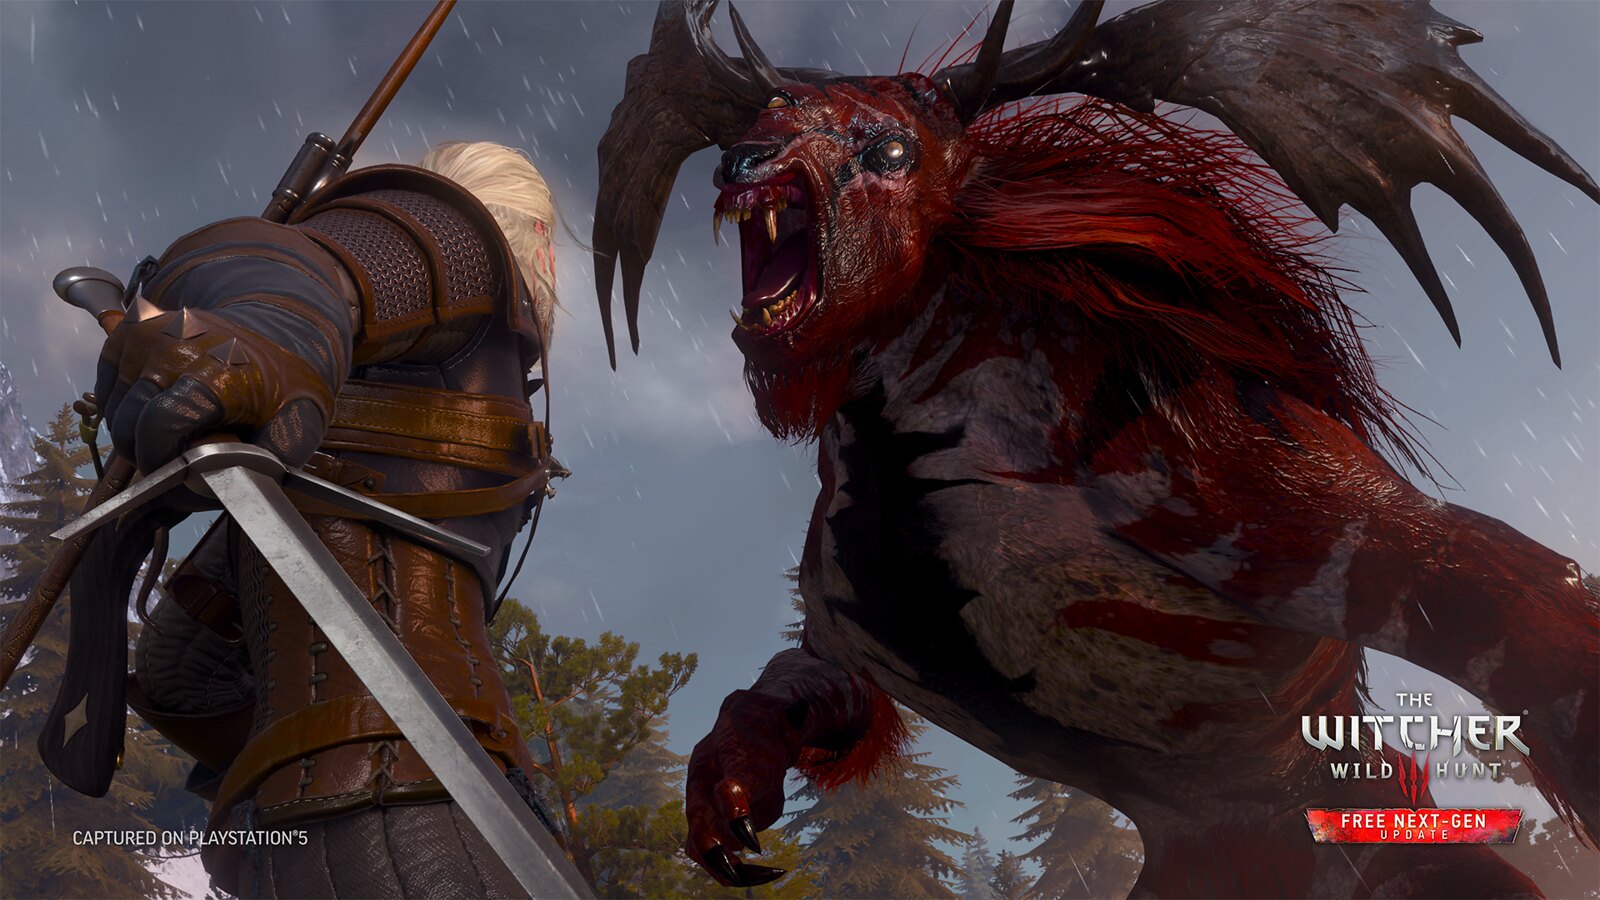 The Witcher 3: Wild Hunt PS5 features detailed